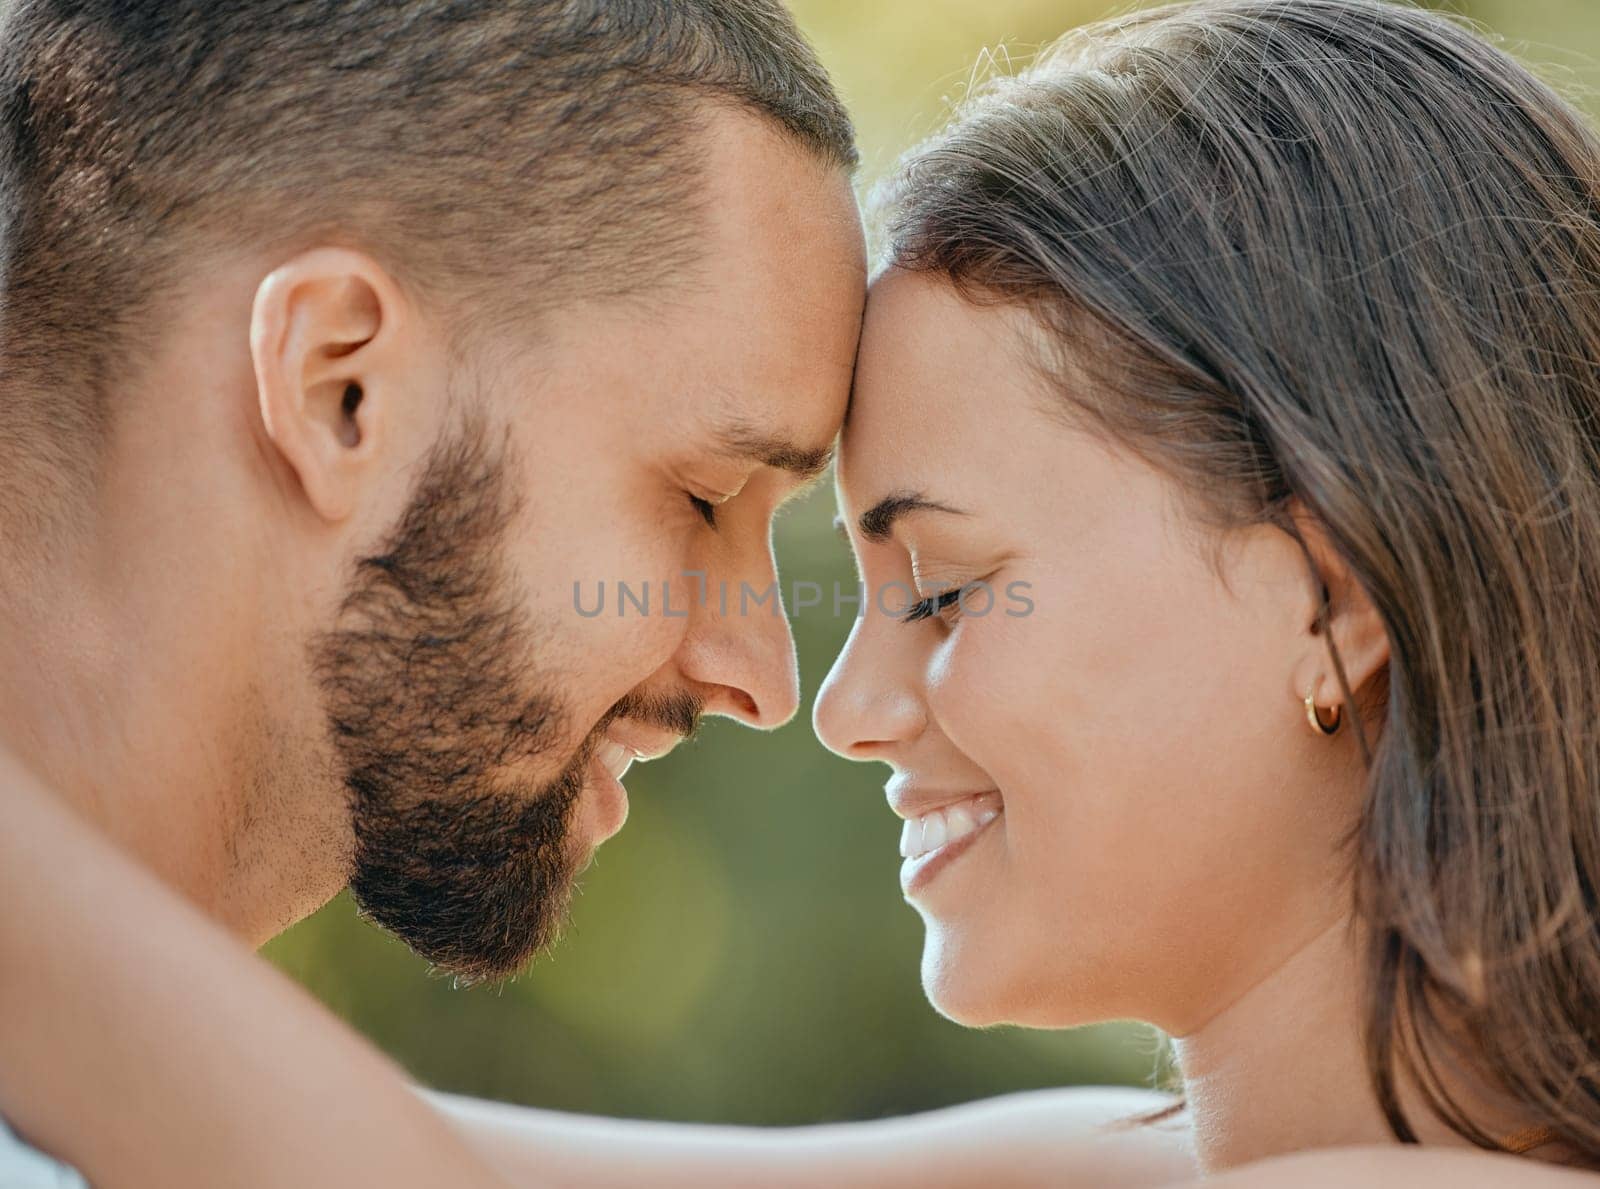 Couple, forehead and hug with smile for love, romance or embracing relationship together in the outdoors. Happy man and woman touching foreheads and hugging in happiness for loving affection outside.